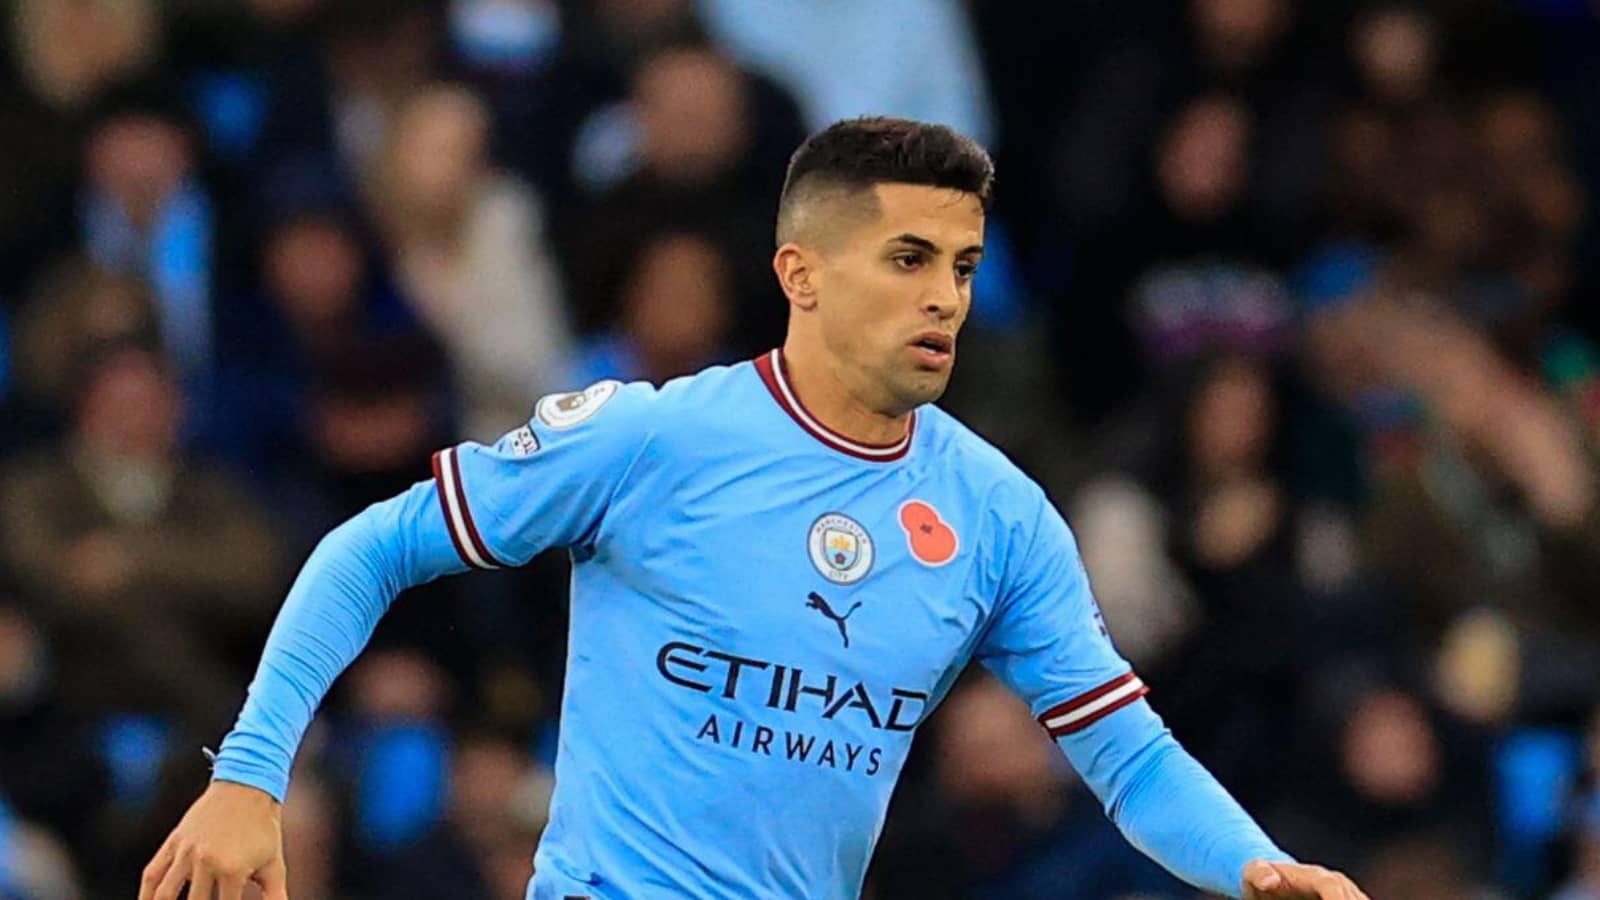 Arsenal and Man City are not close in their valuation of Cancelo